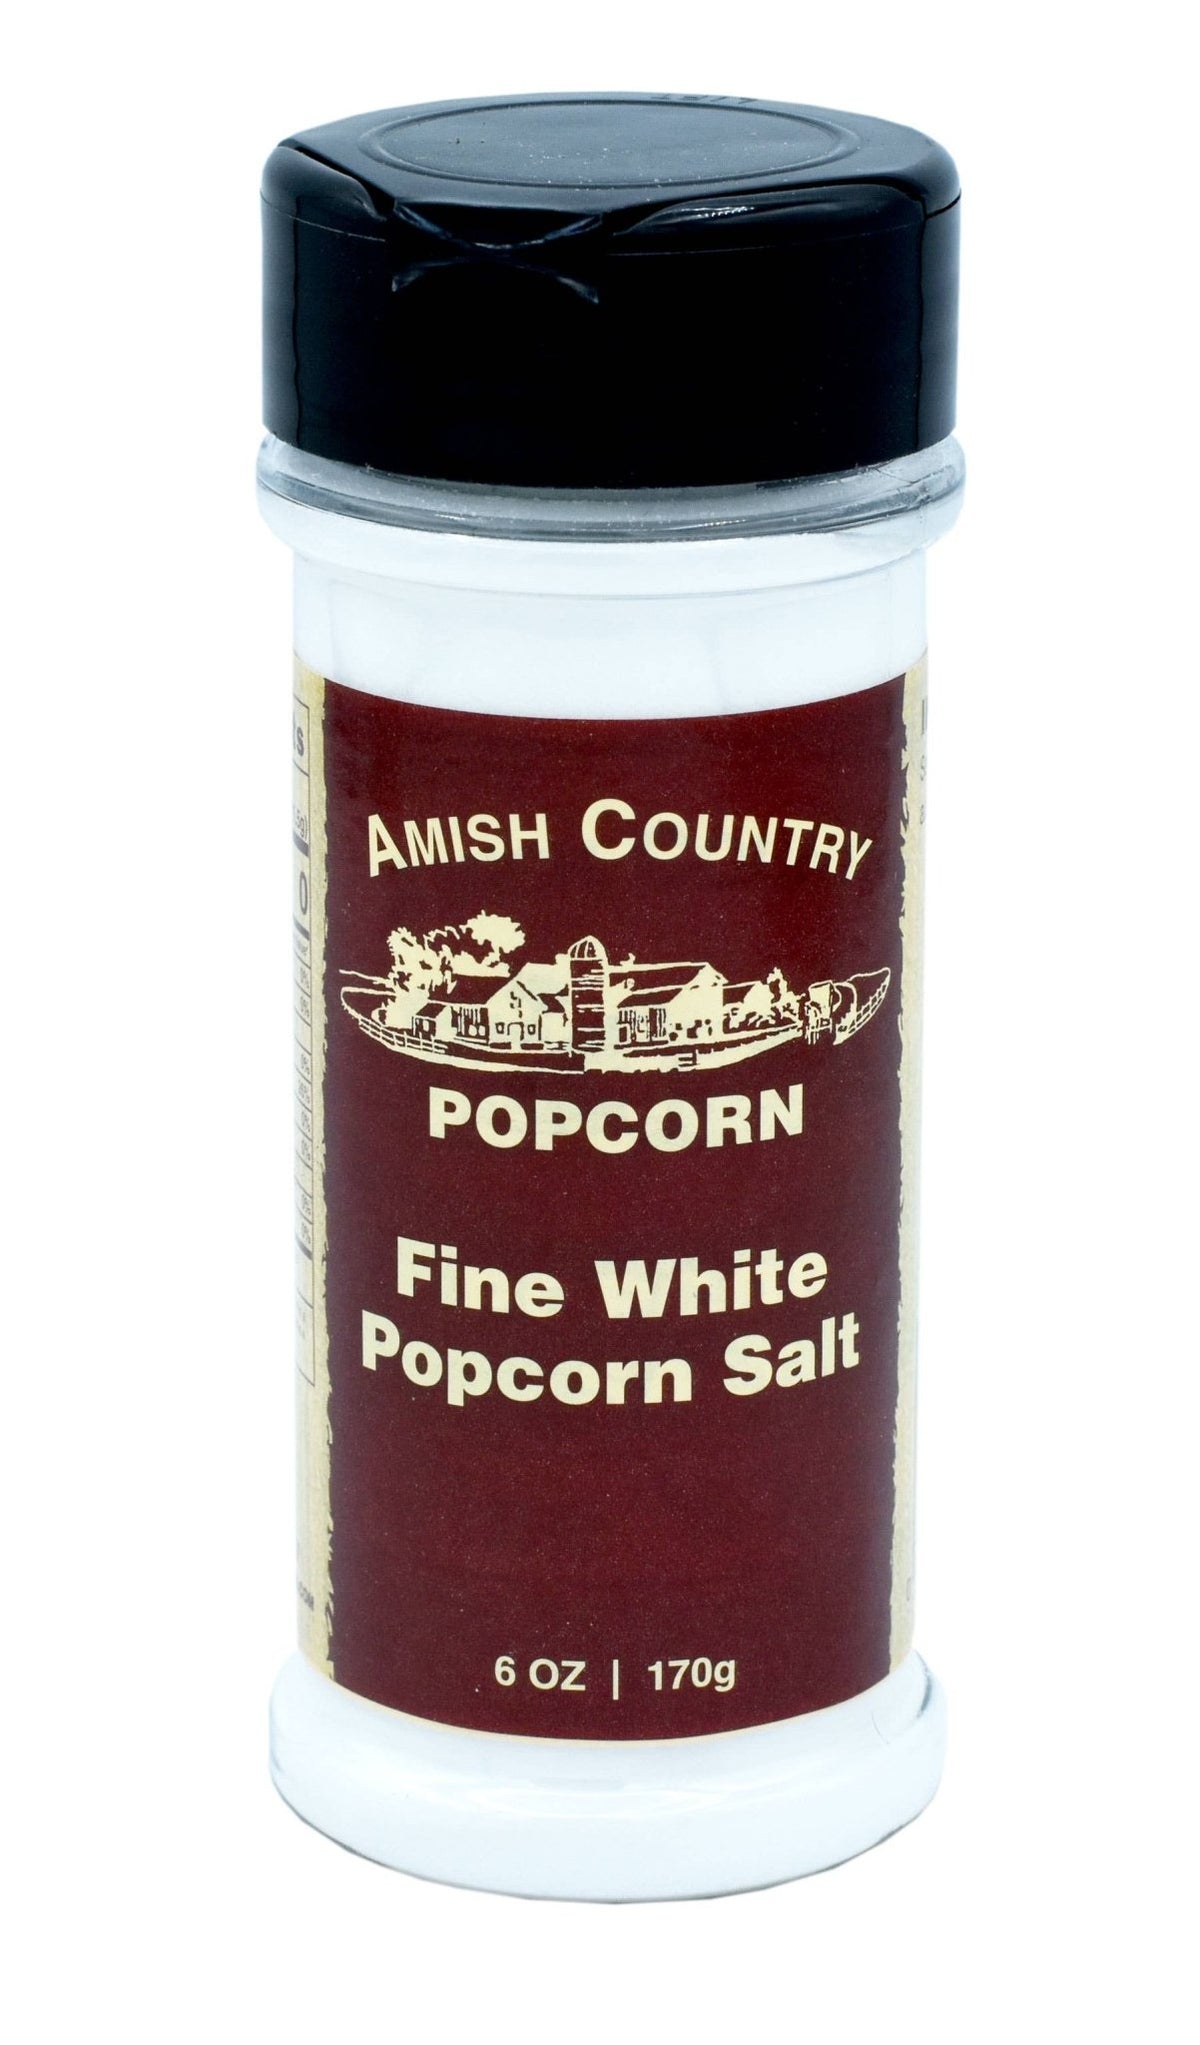 Amish Country Popcorn - 6oz Bottle of Fine White Popcorn Salt - Pacific Flyway Supplies